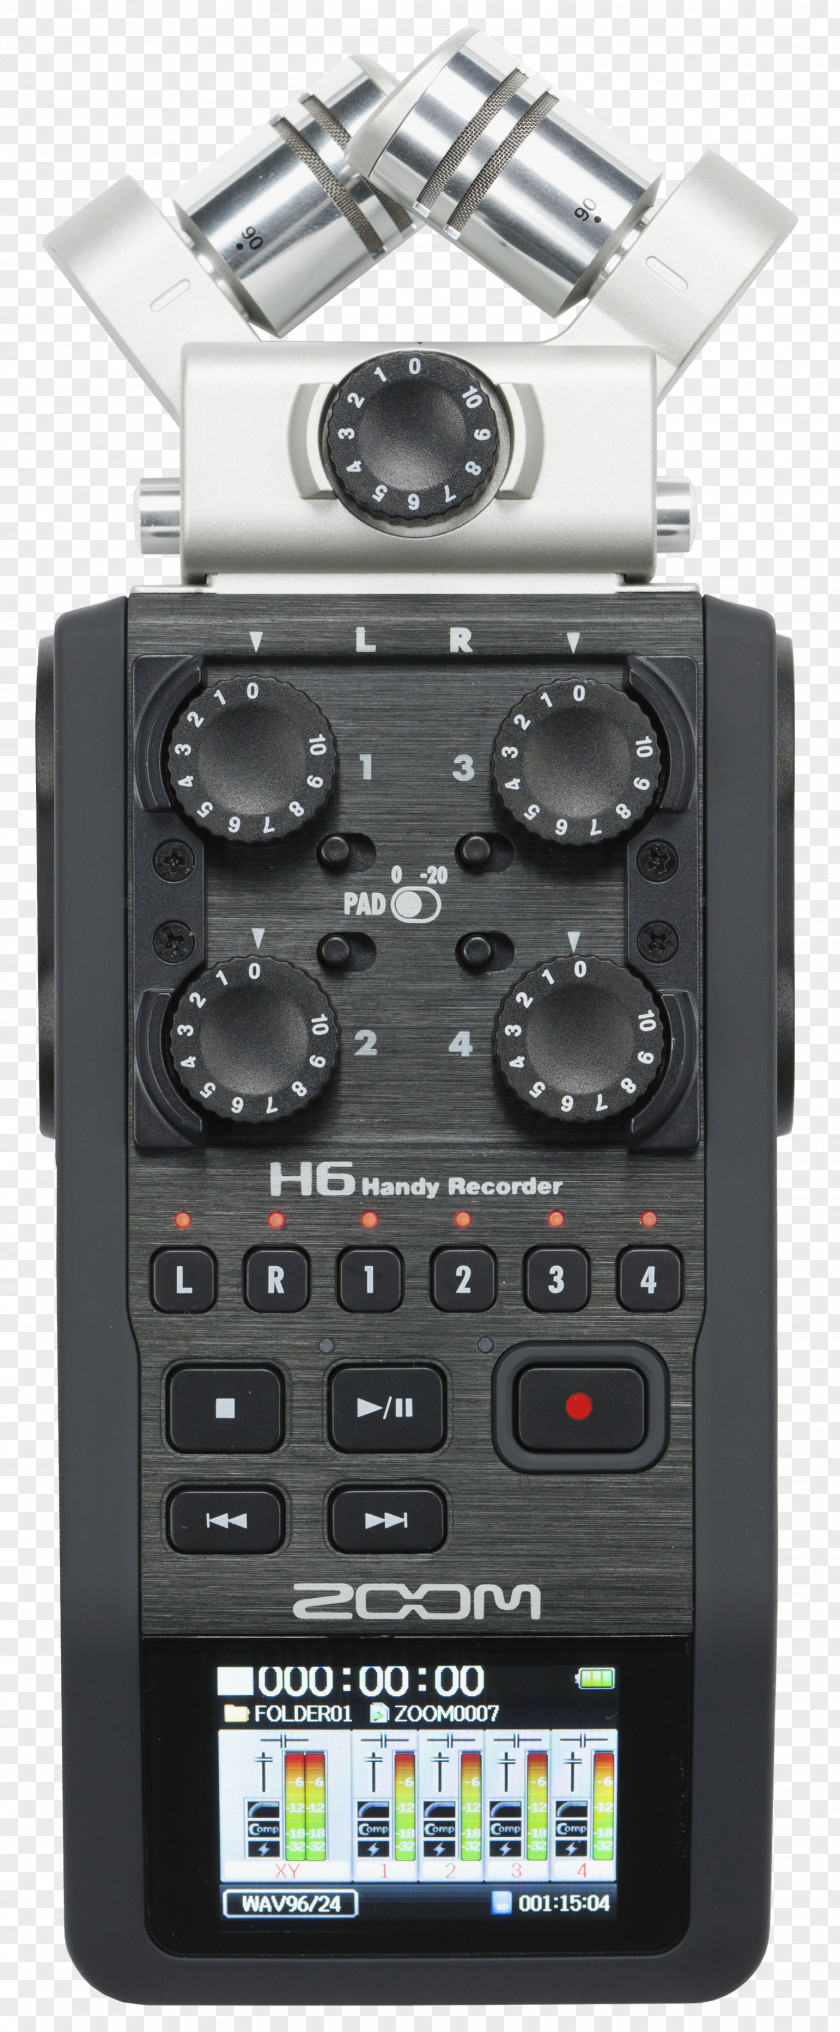 Mic Microphone Zoom Corporation Audio Sound Recording And Reproduction H2 Handy Recorder PNG